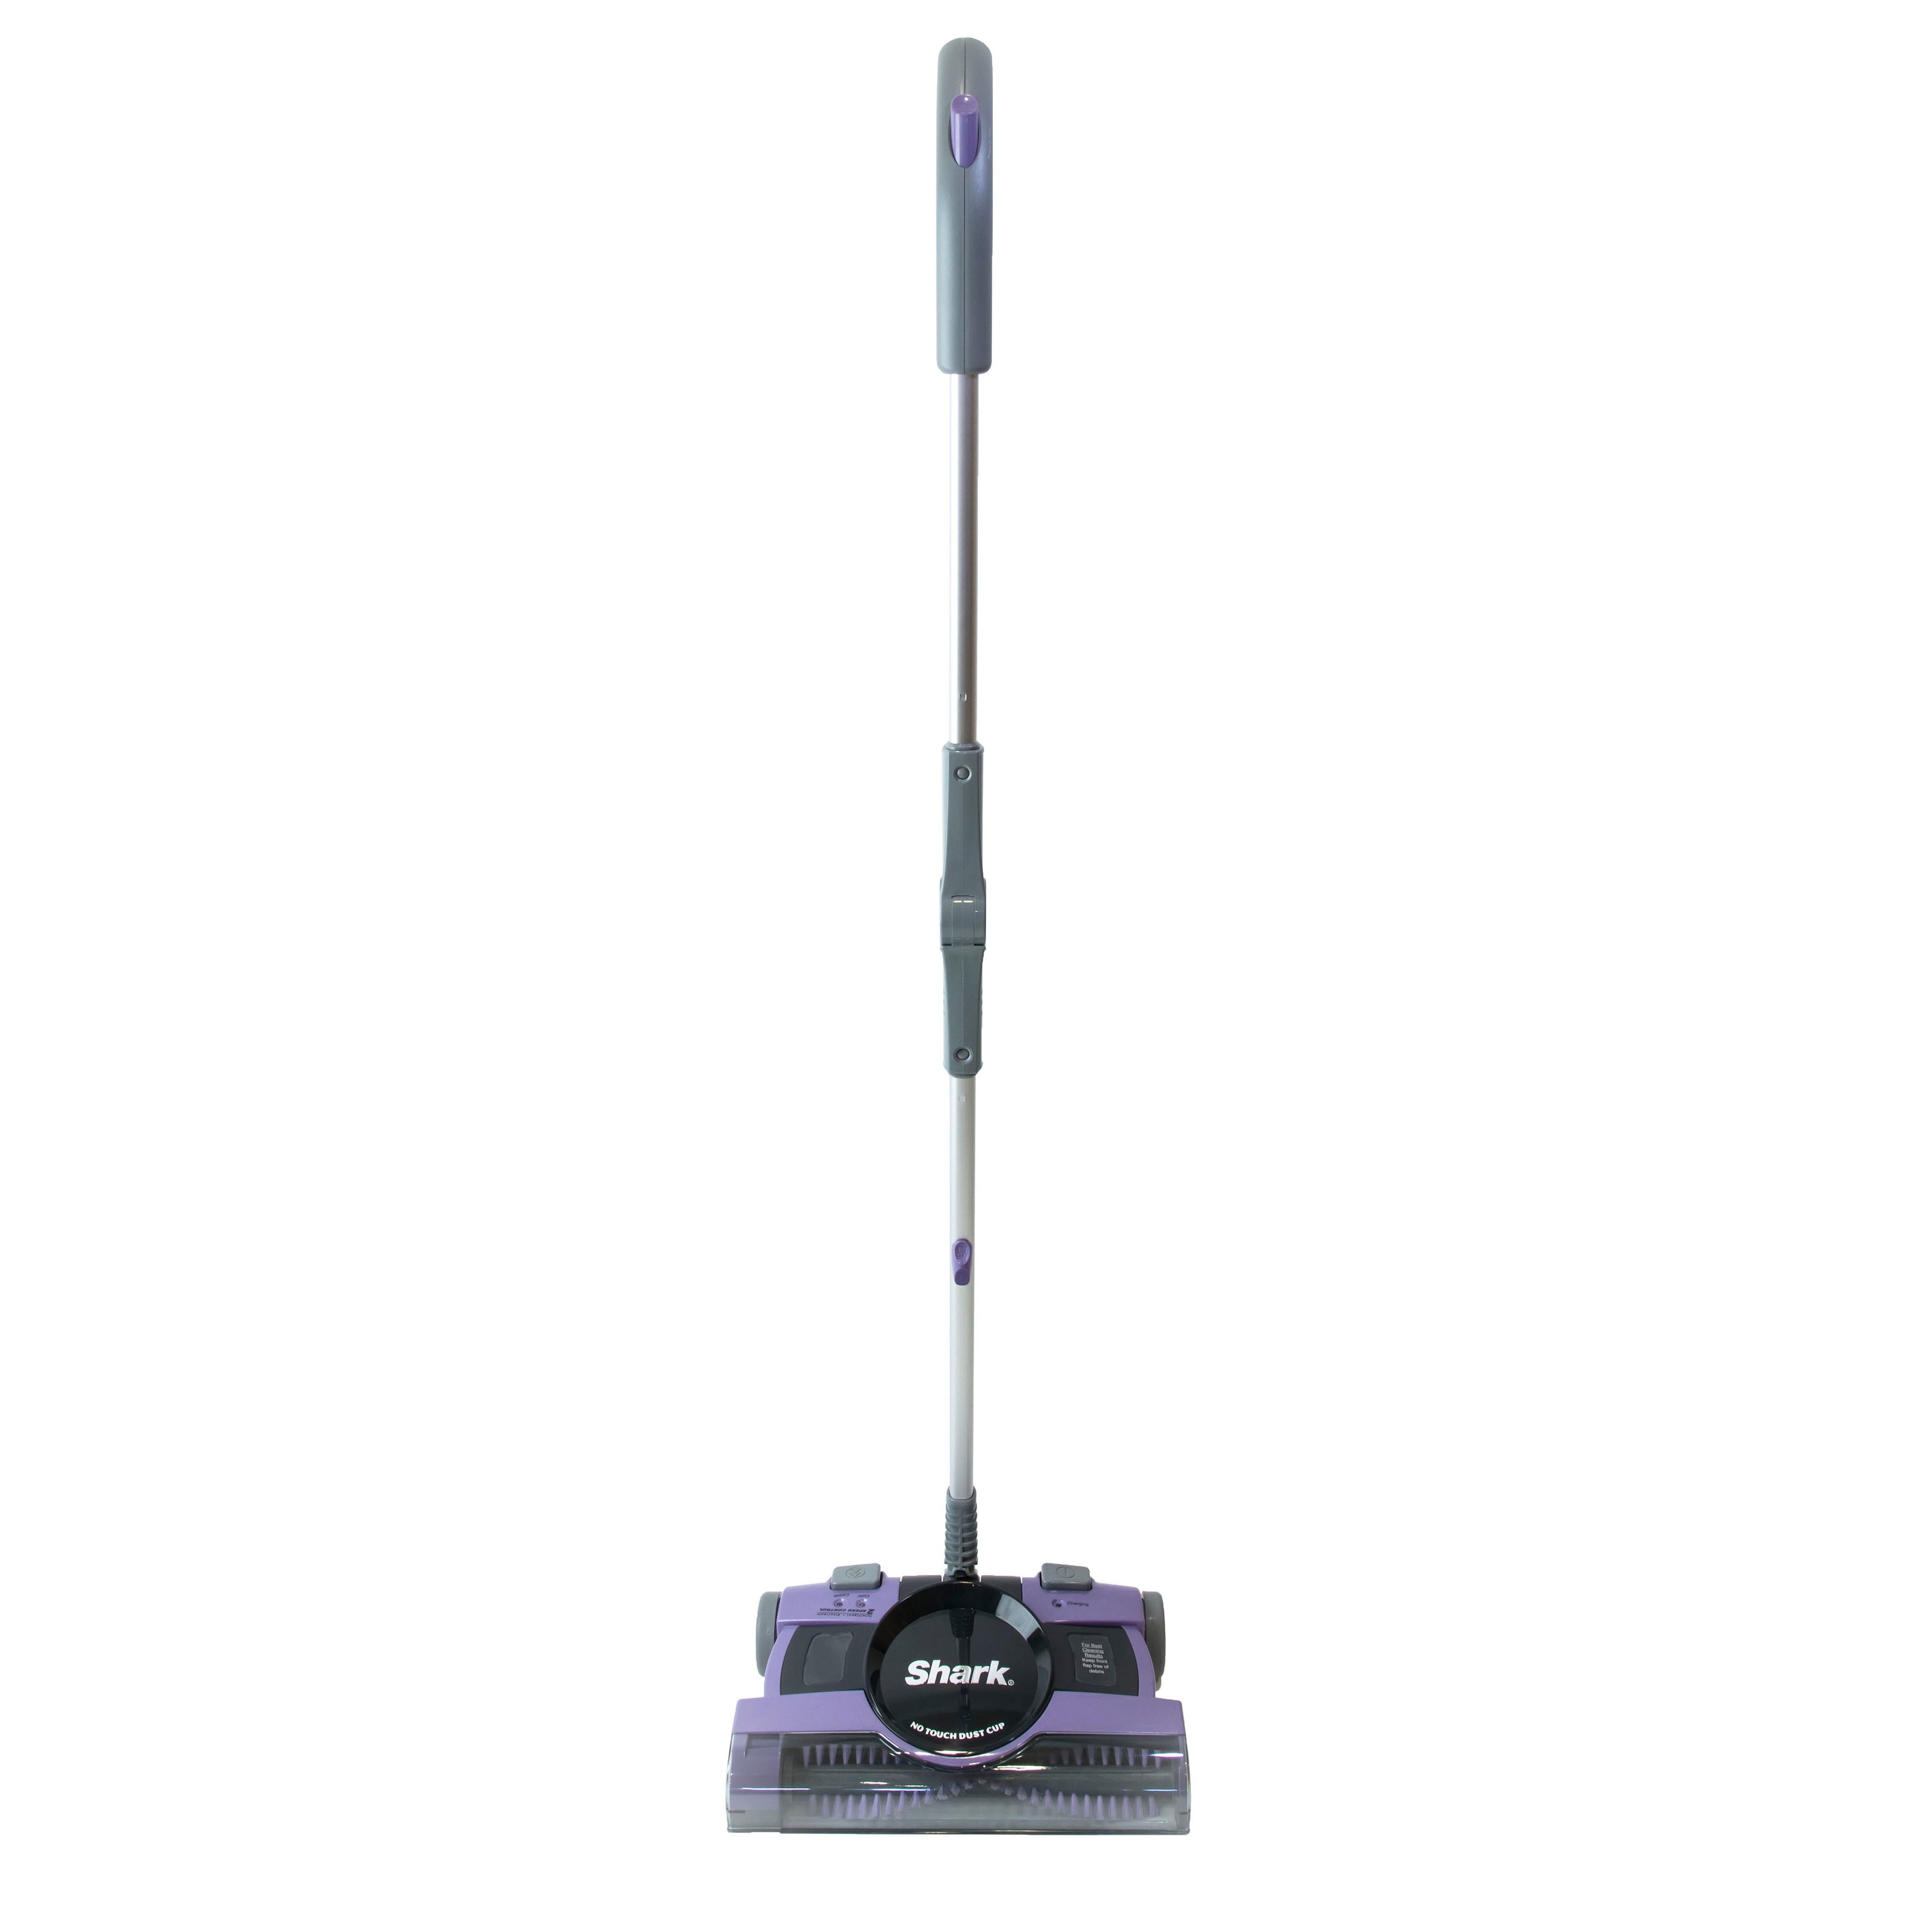 https://ak1.ostkcdn.com/images/products/7895140/Shark-V2950-13-inch-Rechargeable-Floor-and-Carpet-Sweeper-17ea85e2-4ff4-4b15-b7a0-8f5a518edfed.jpg